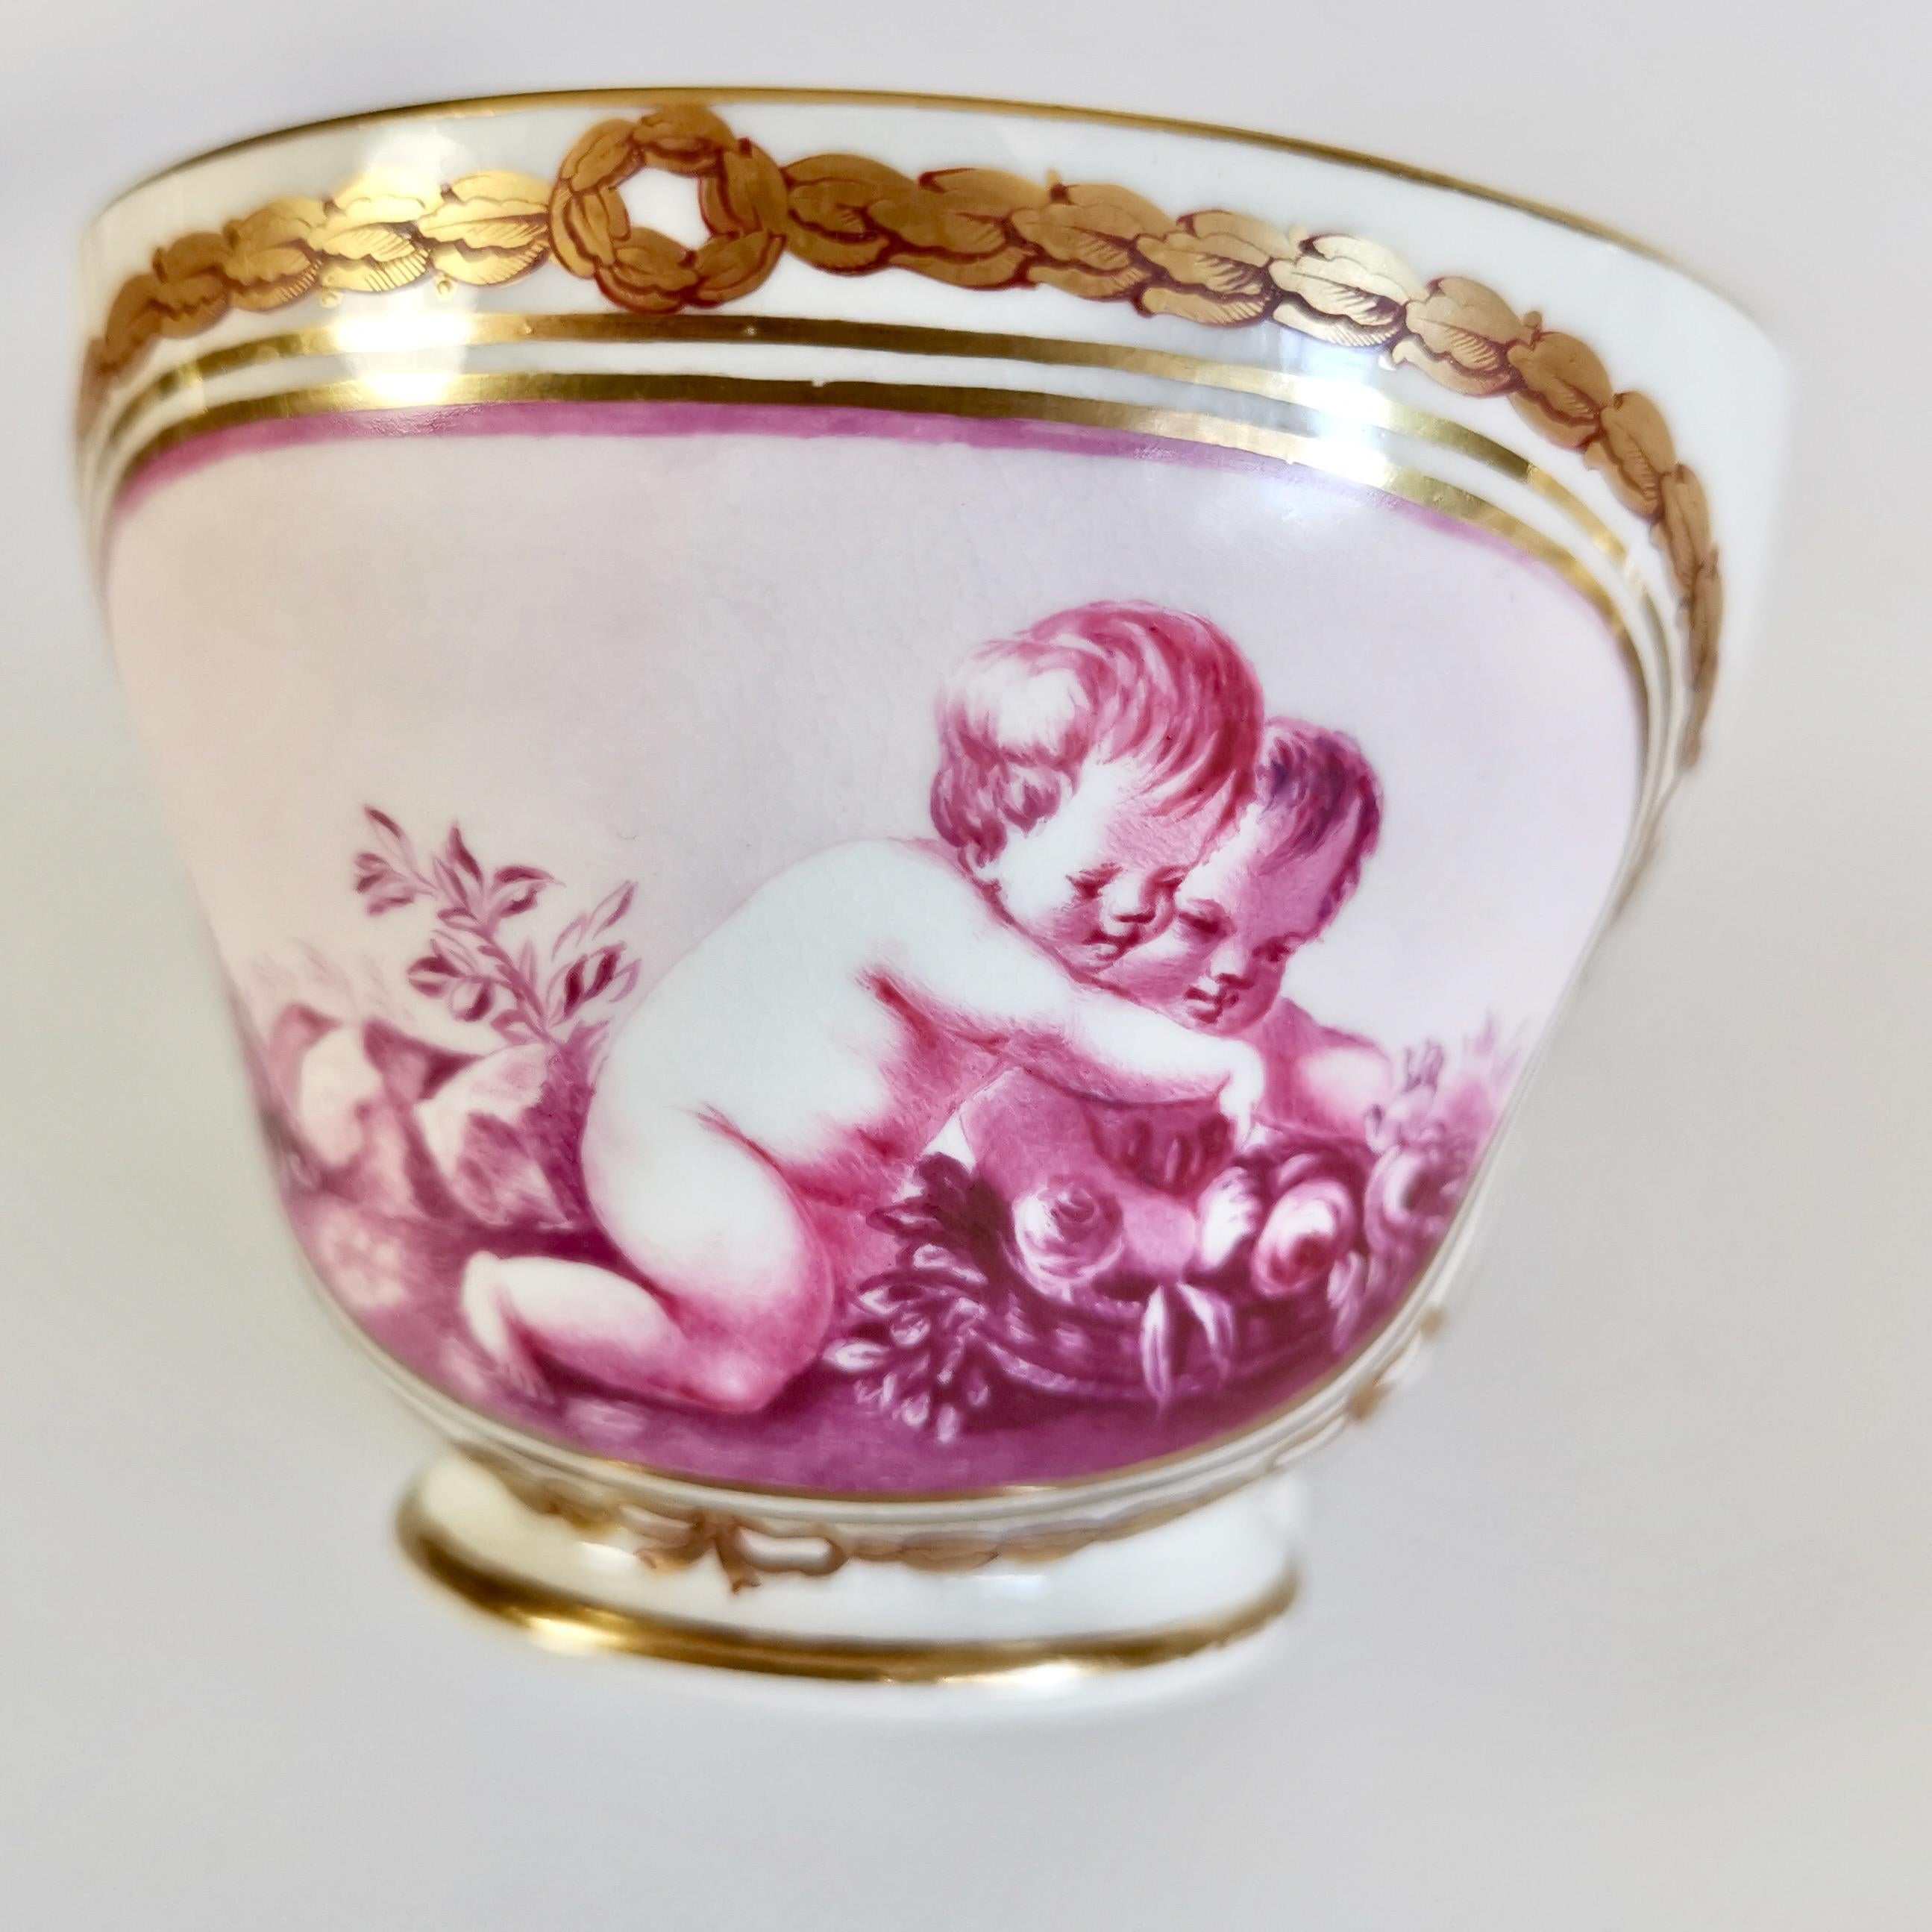 Kerr & Binns Worcester Porcelain Cup and Saucer, Puce Putti Playing, circa 1855 2